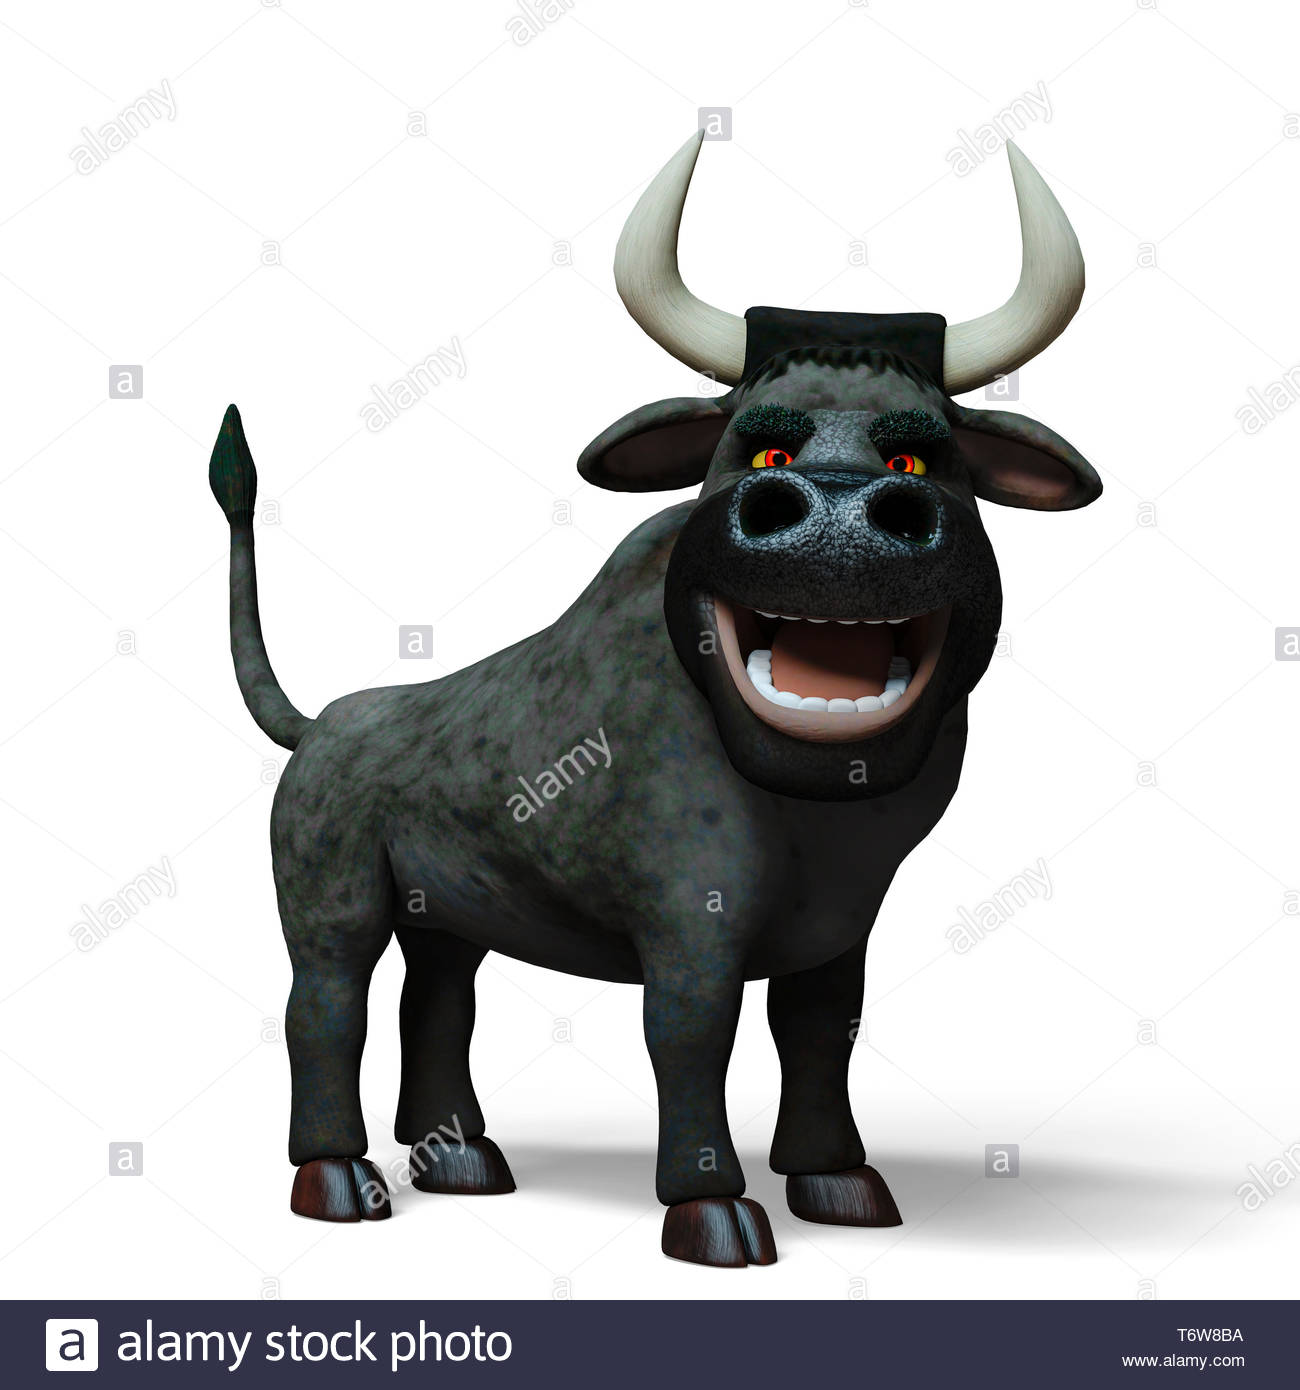 The Black Bull Cartoon In White Background Will Put Some Fun